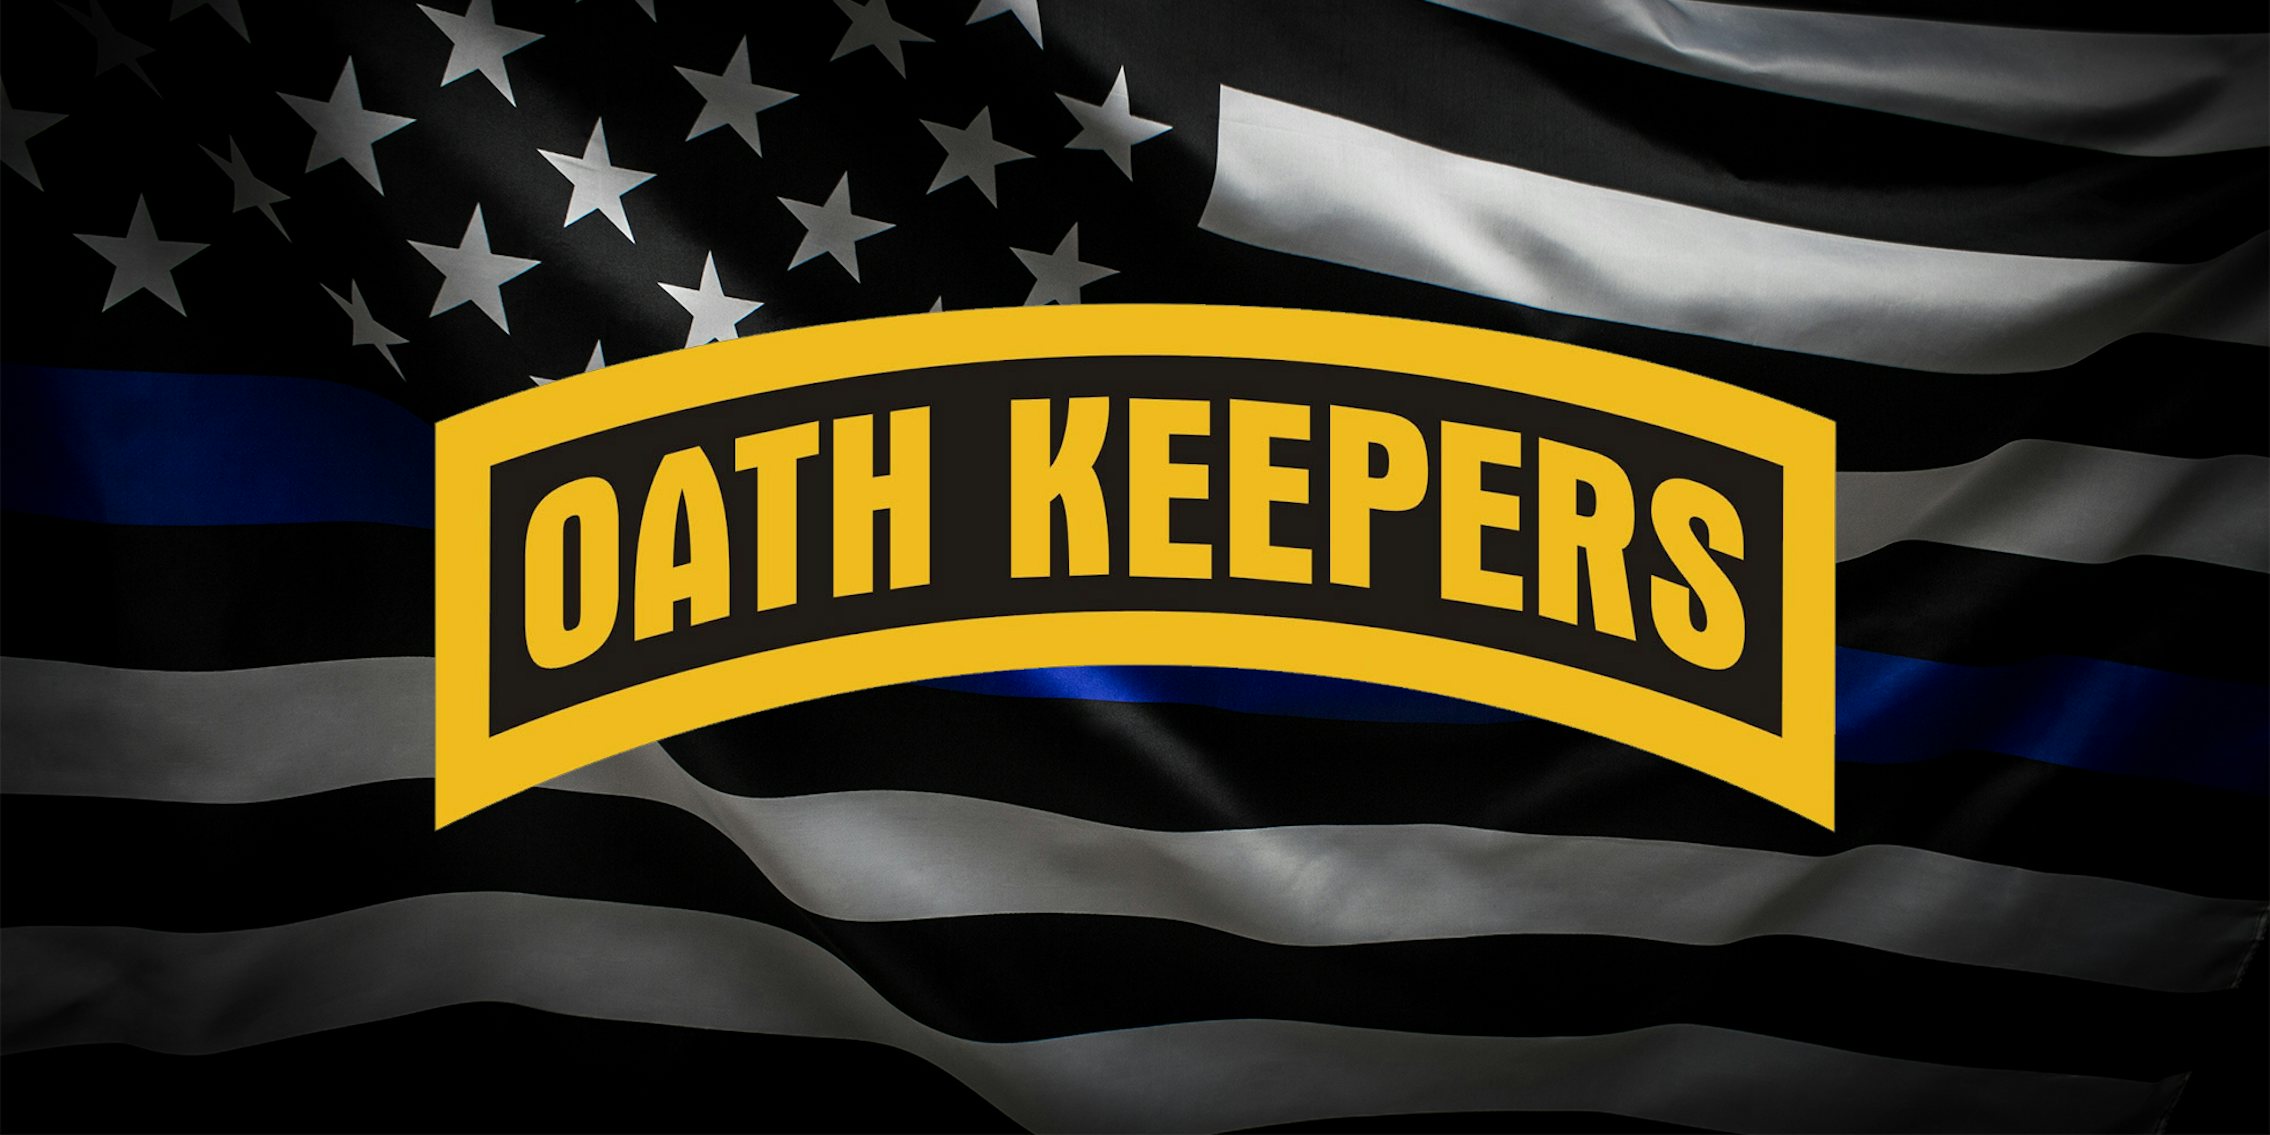 Oath Keepers logo over Thin Blue Line Wavy American Flag in Support of Police and Law Enforcement